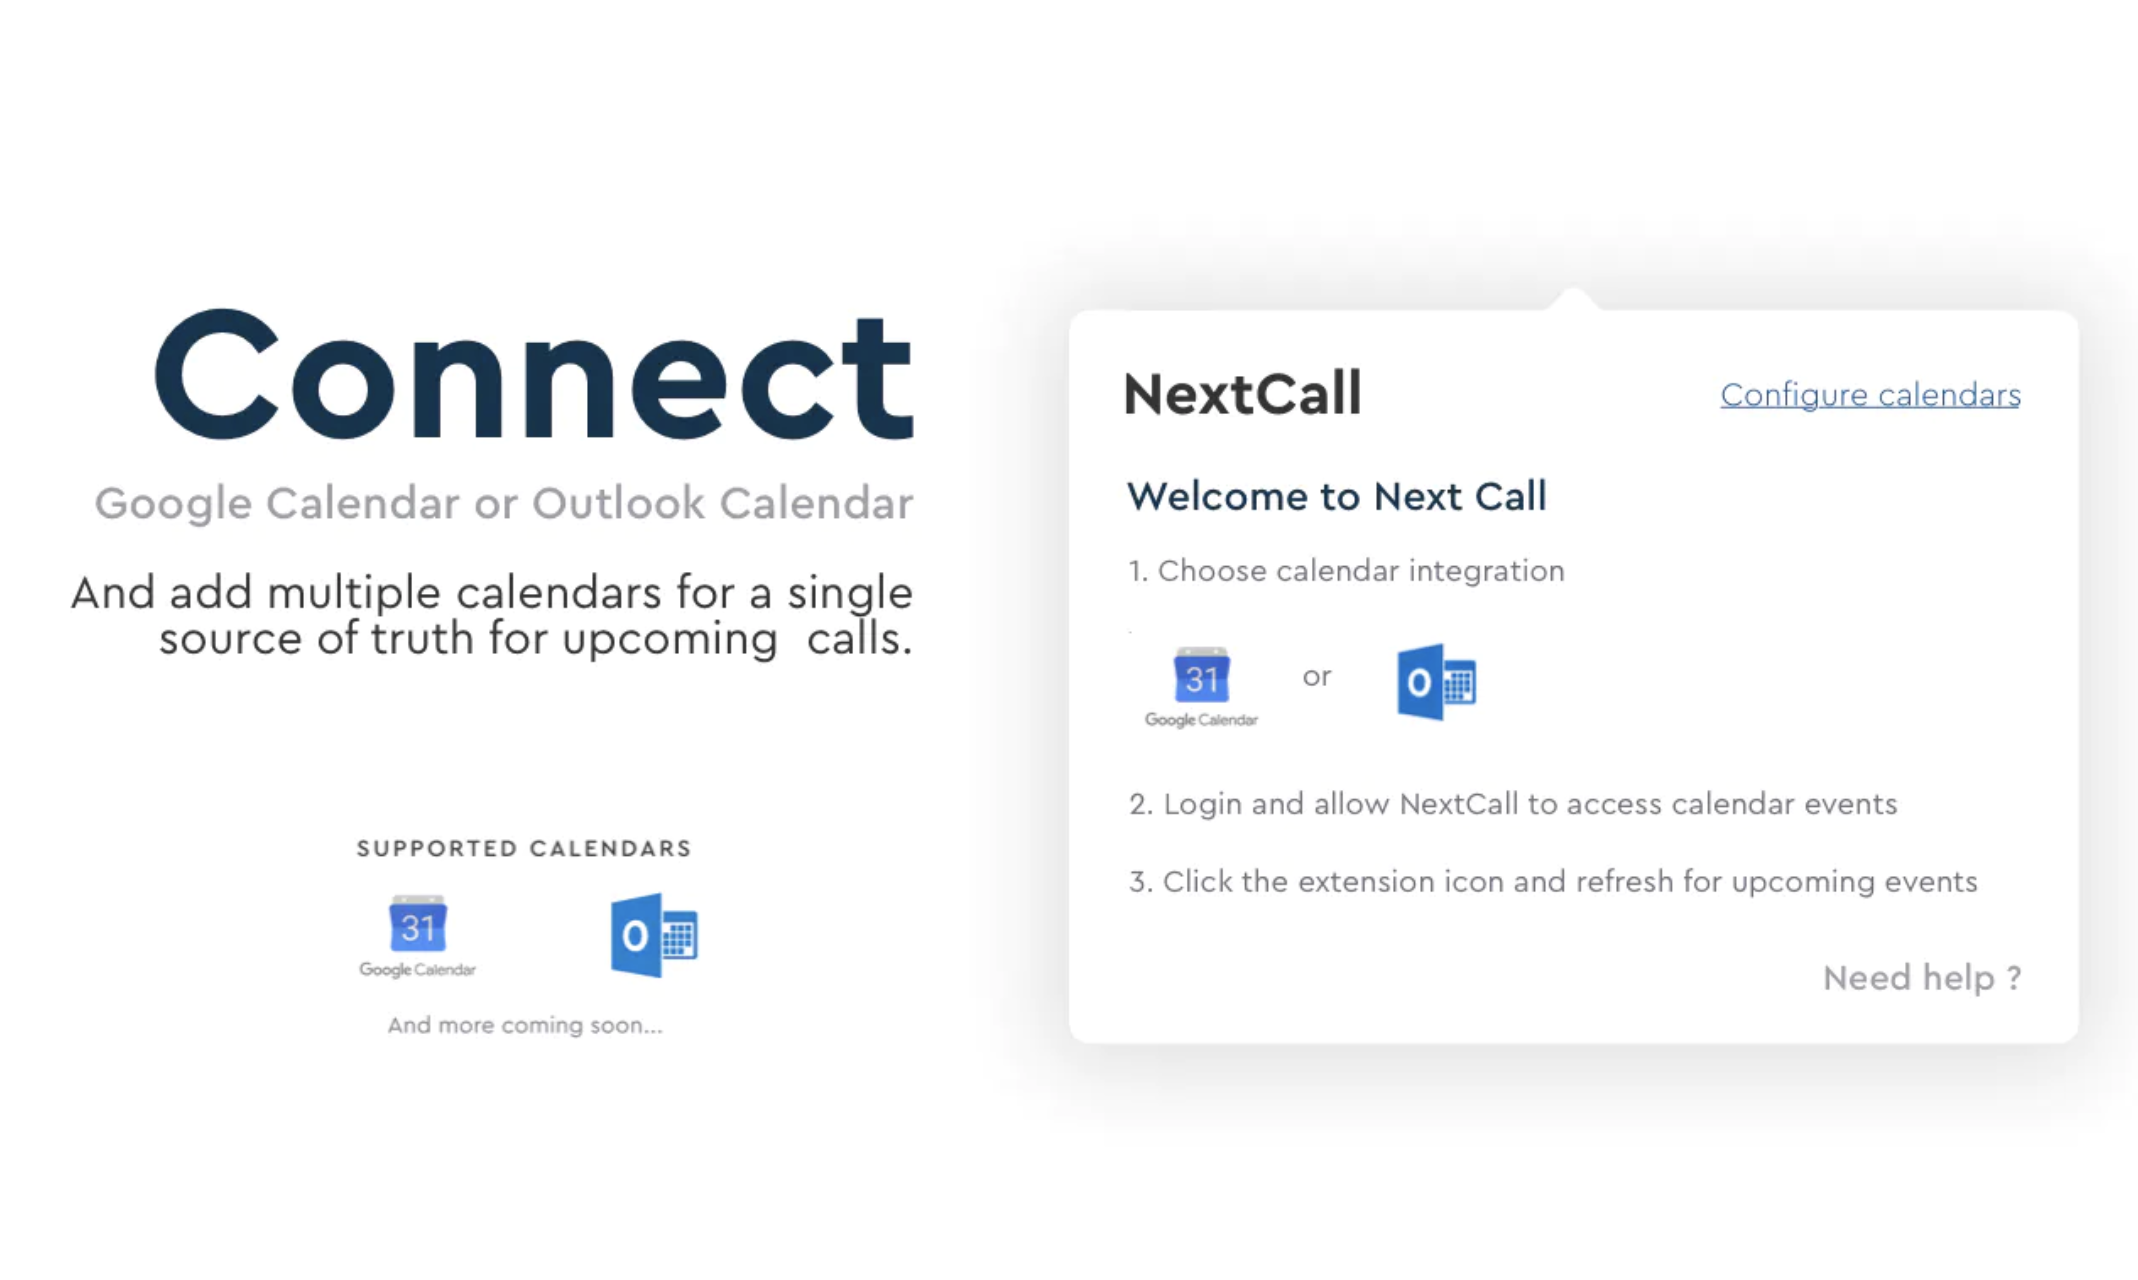 Find detailed information about NextCall